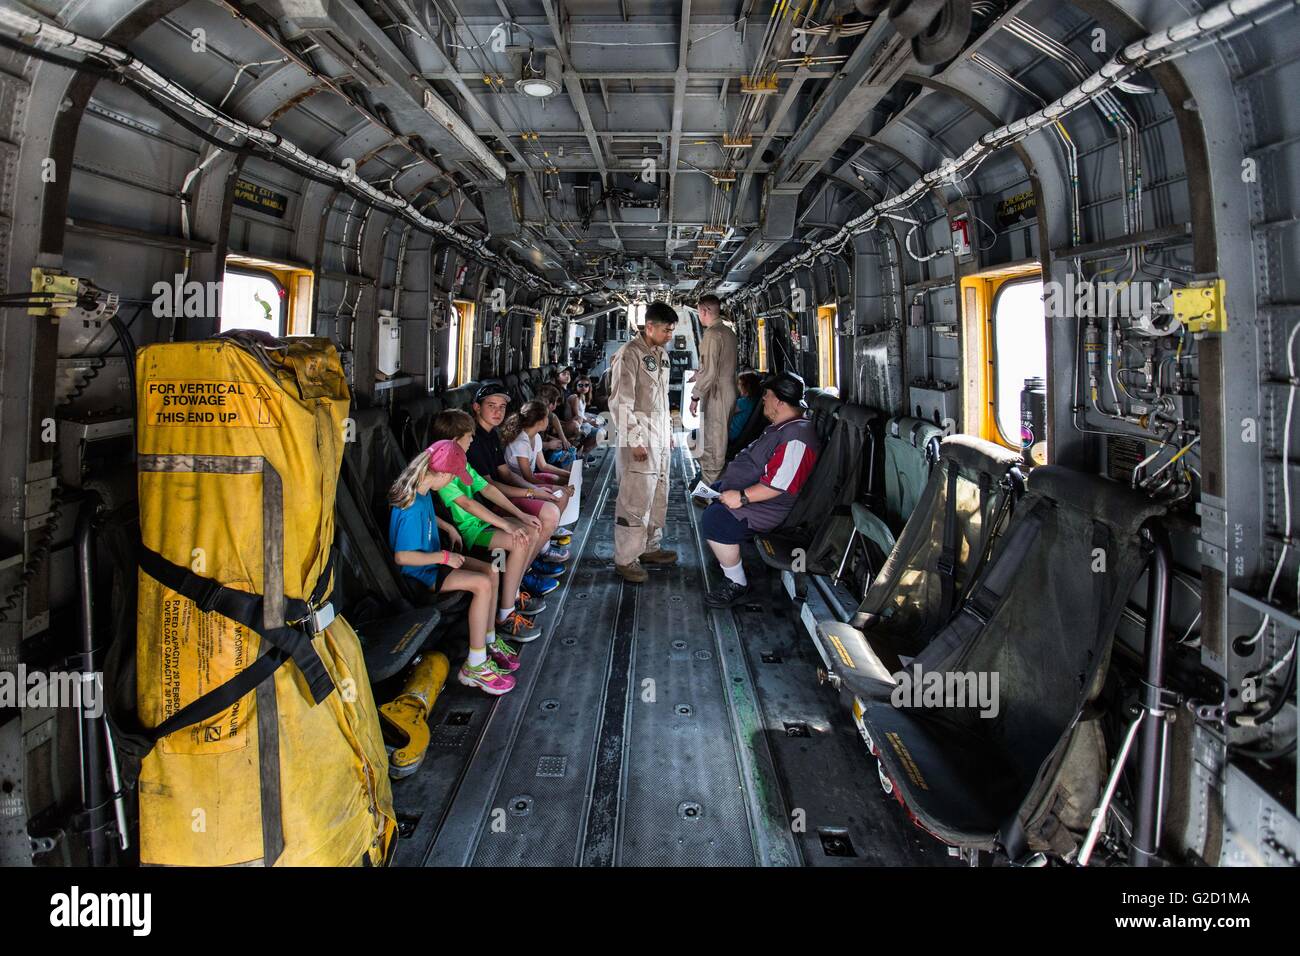 New York, USA. 27th May, 2016. New York, Annual New York Fleet Week in New York. 27th May, 2016. People sits inside a Sikorsky CH-53E Super Stallion helicopter on board the USS Bataan (LHD-5), Wasp-class amphibious assault ship, during the 28th Annual New York Fleet Week in New York, the United States on May 27, 2016. New York Fleet Week takes place from May 25 to May 30, where hundred of service men and women in the Armed Forces visit New York City as part of Memorial Day commemorations. Credit:  Li Muzi/Xinhua/Alamy Live News Stock Photo